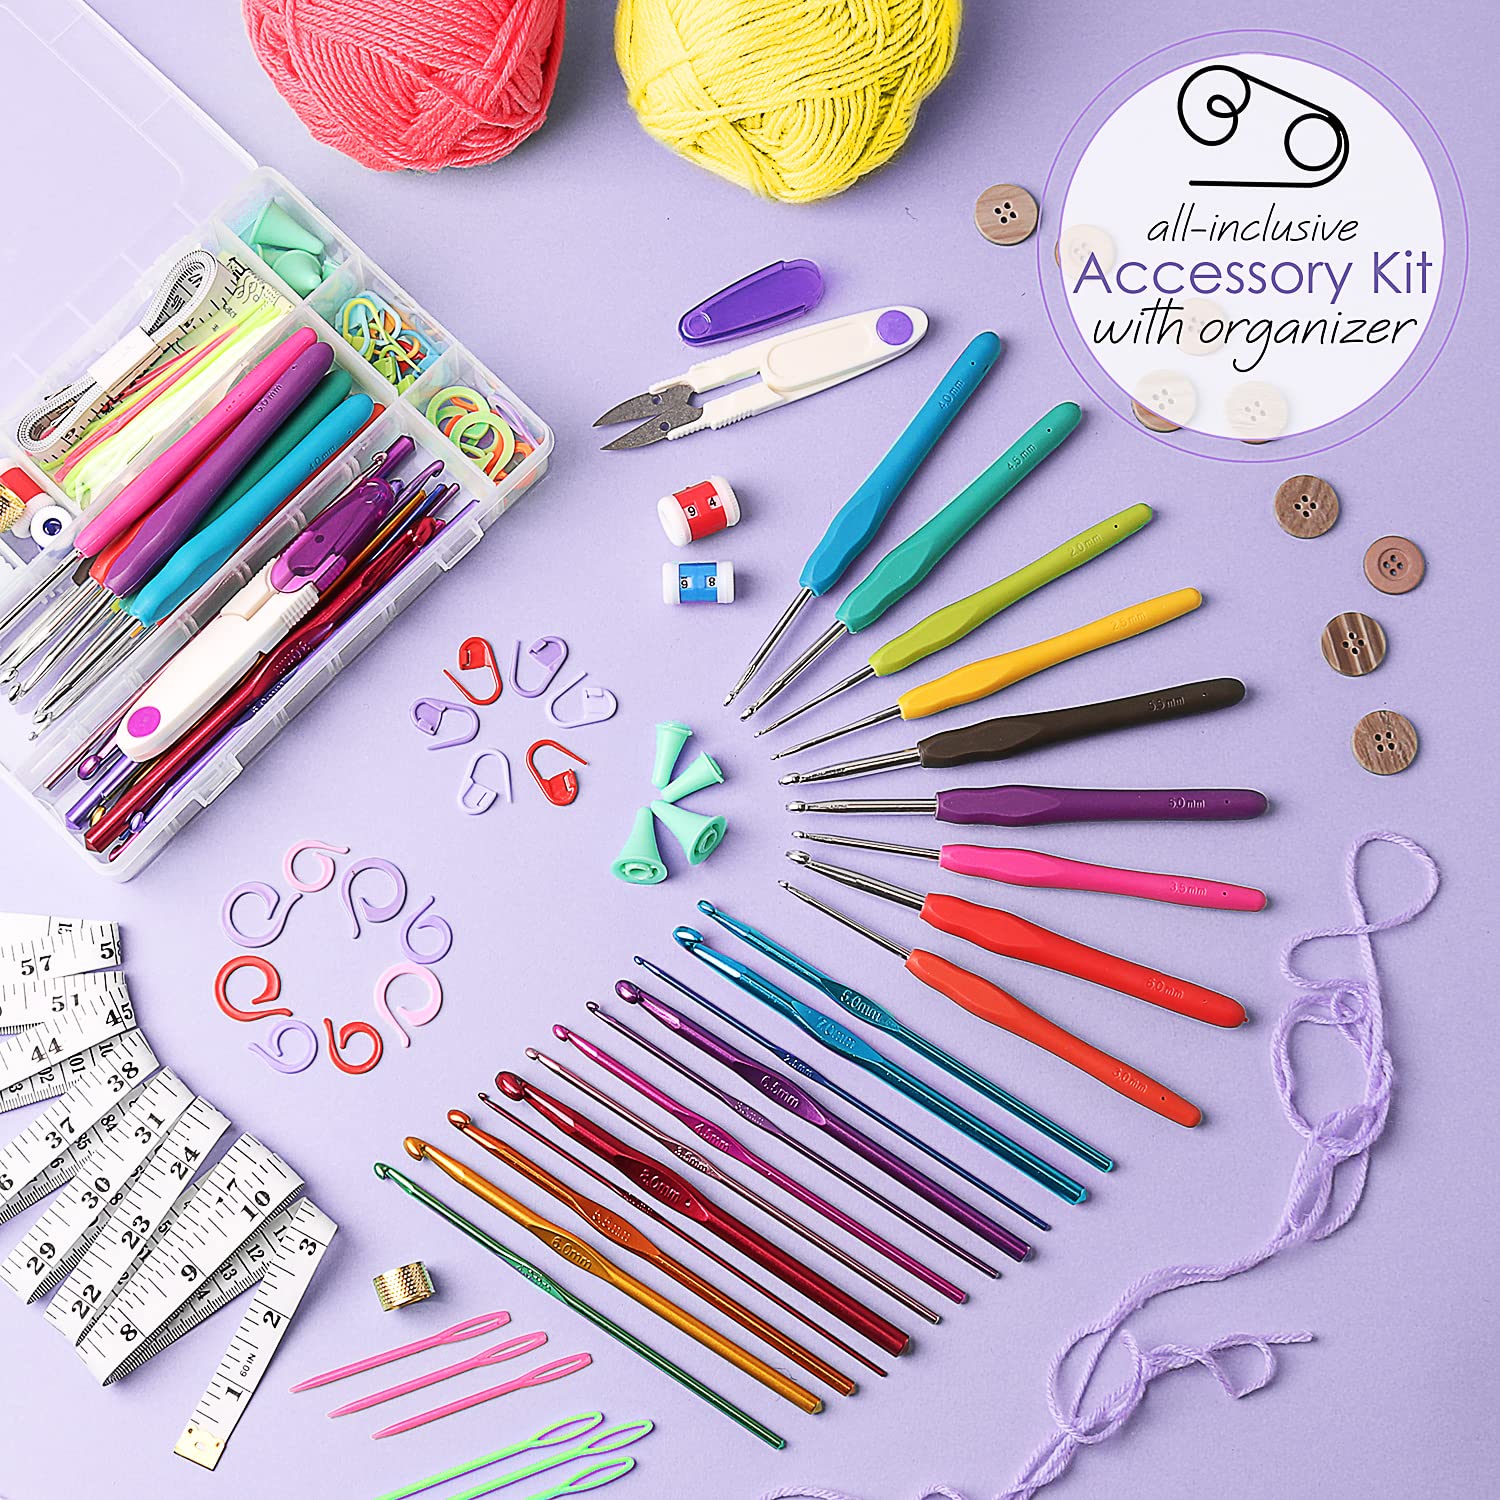 Learn to Crochet Kit for Beginners Adults – Beginner Crochet Kit for Adults and Kids, 80 Piece Crochet Set with Step-by-Step Guide and Projects Book, Crochet Starter Kit, Crochet Yarn, and Hooks